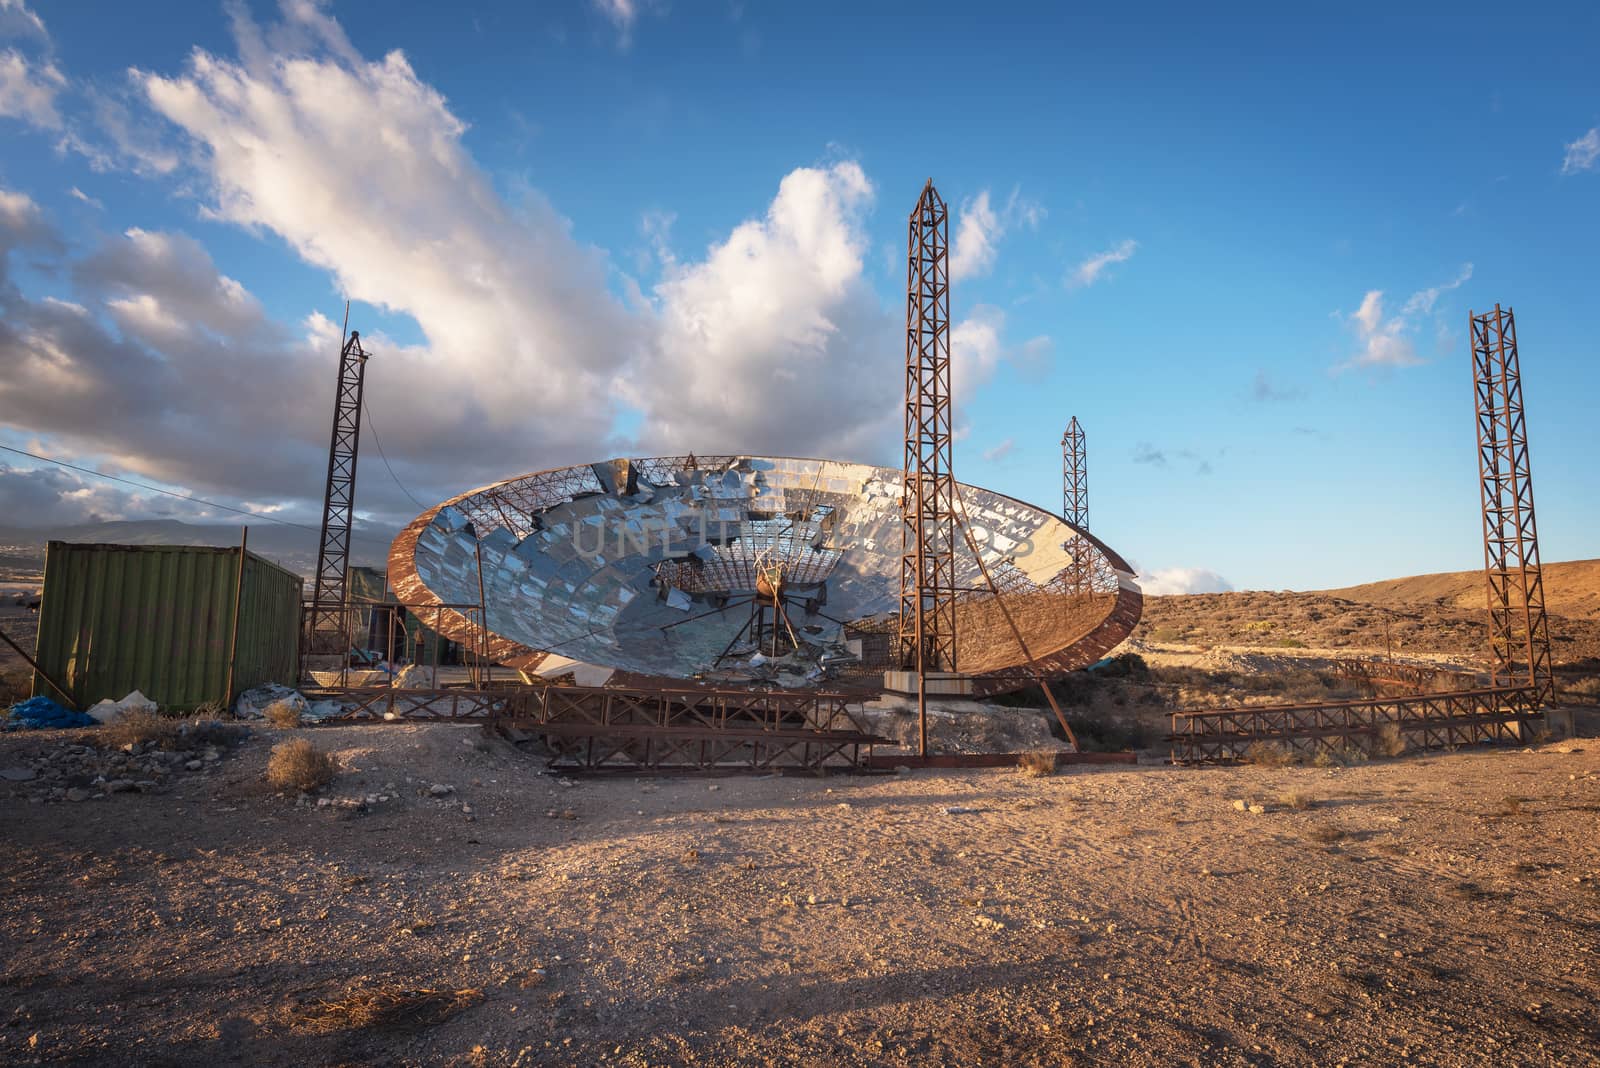 Ruined setellite dish antenna in south Tenerife, Canary islands, by HERRAEZ